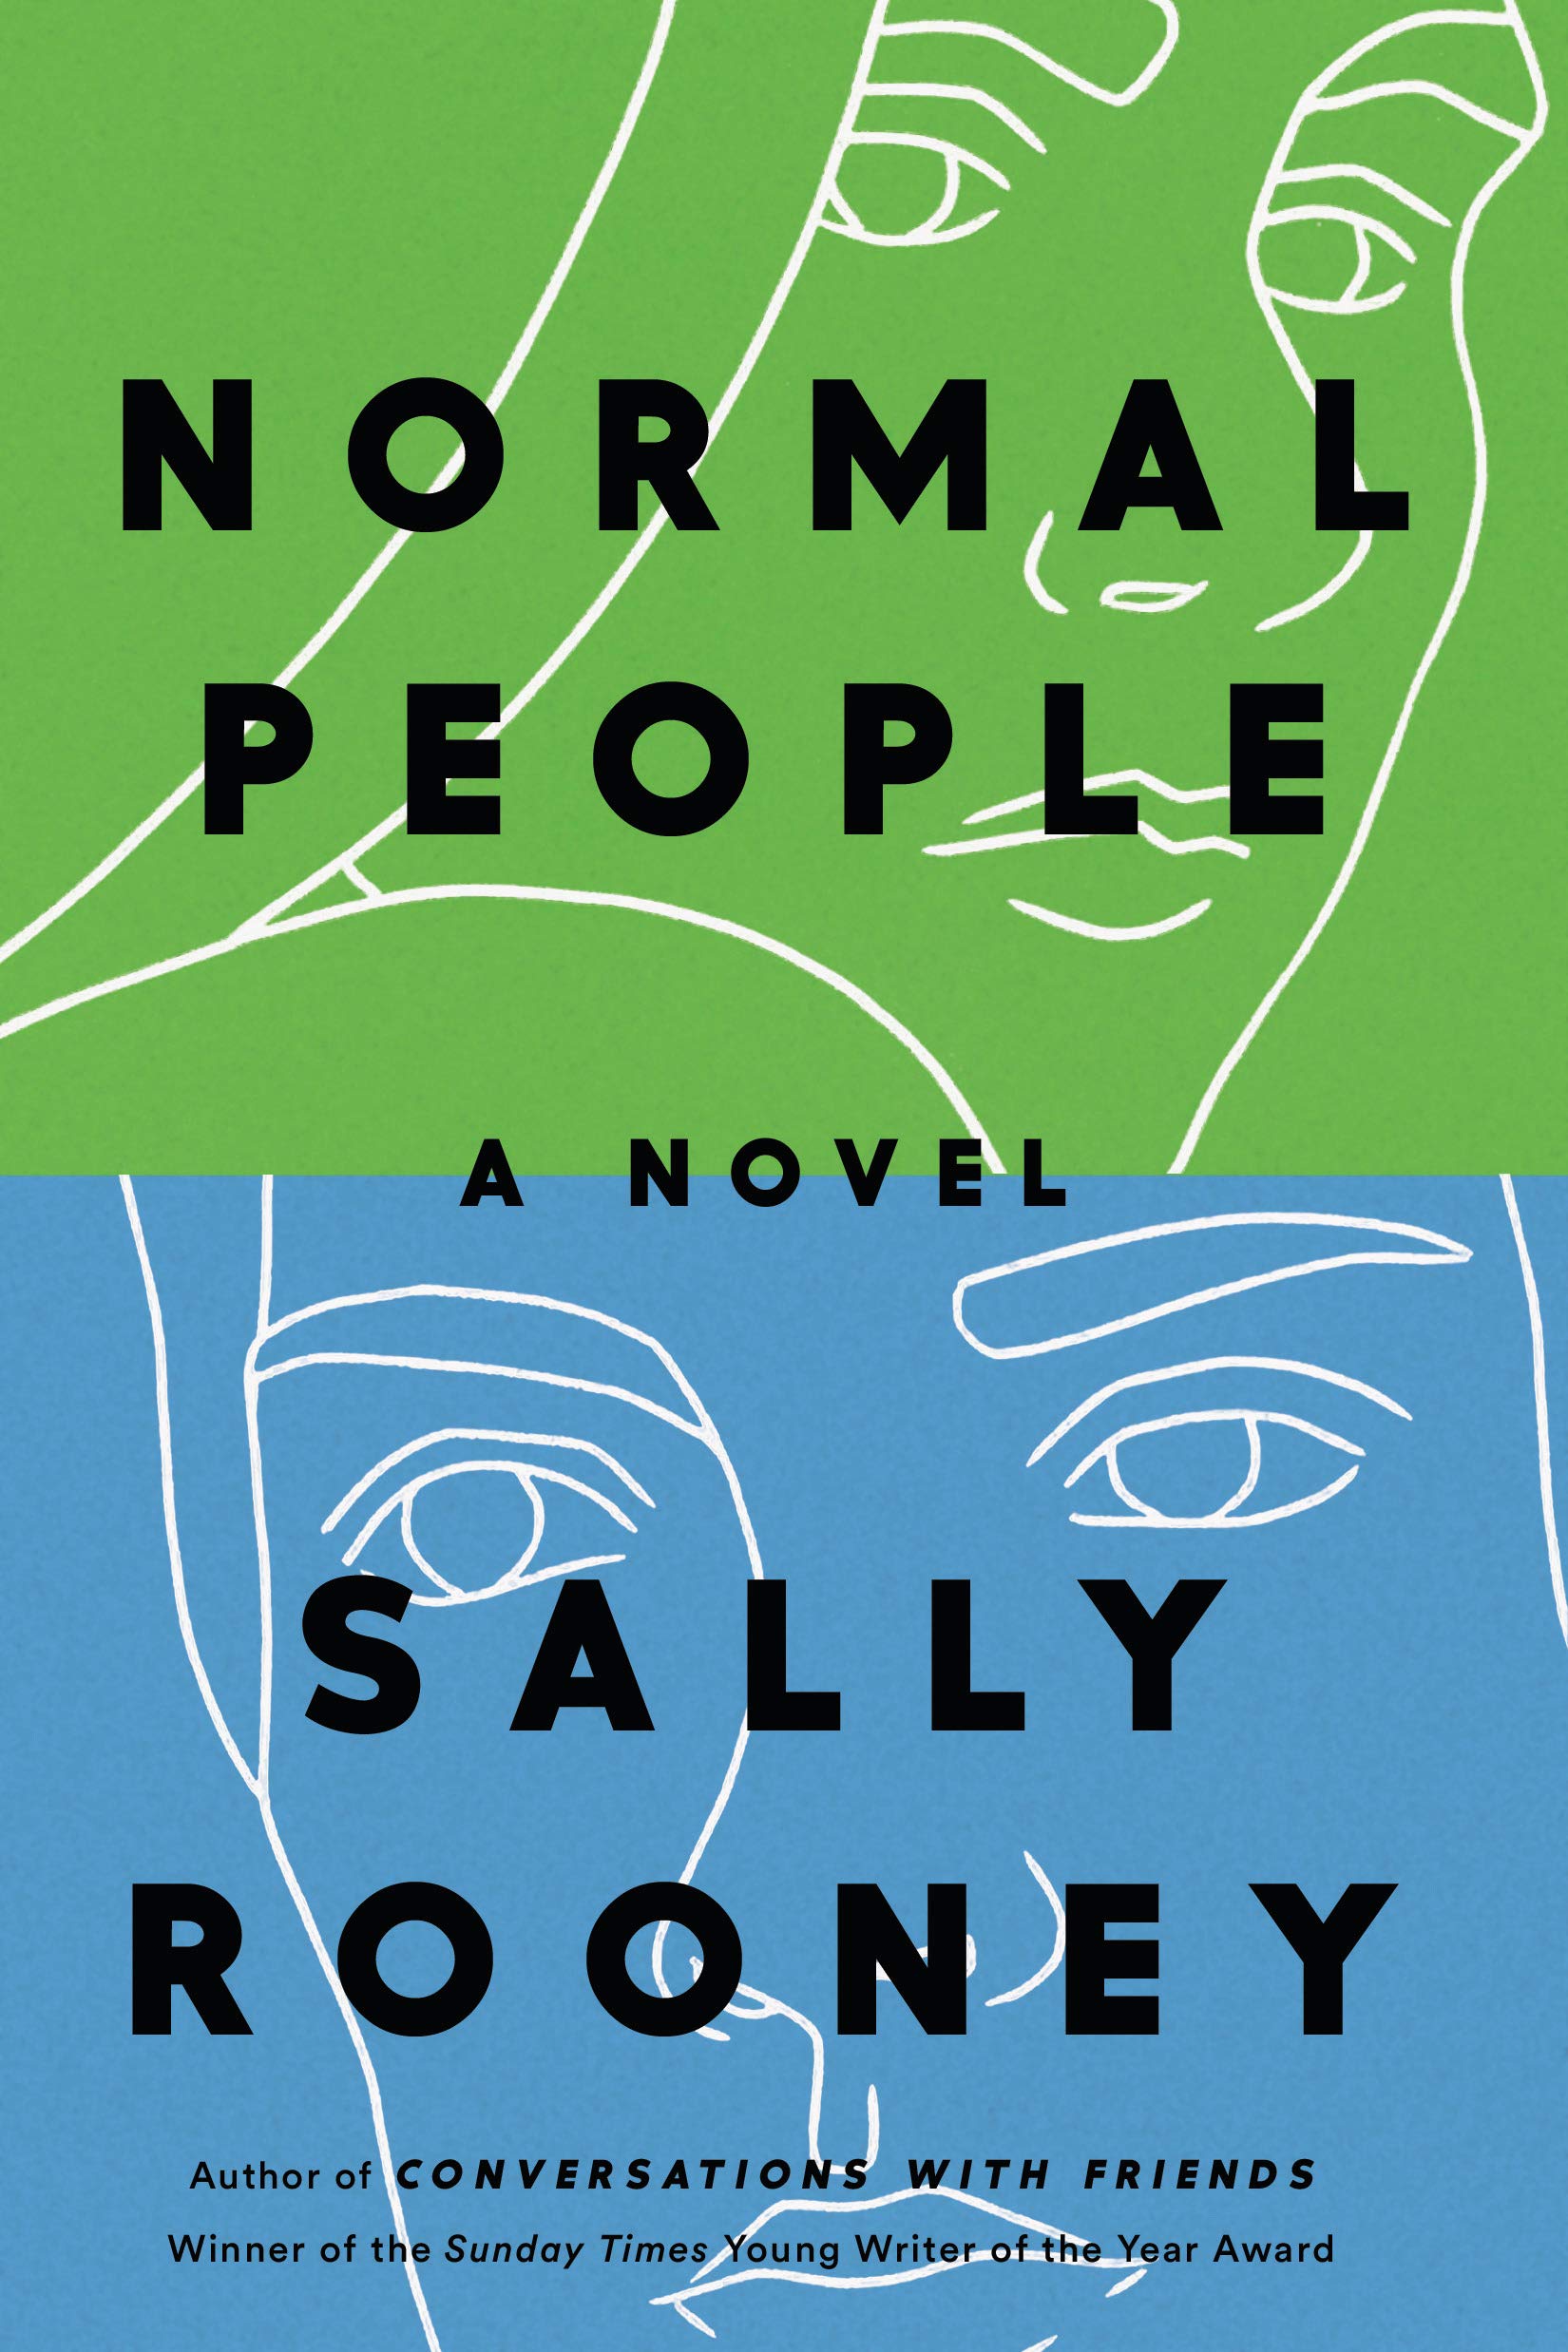 Book cover illustration featuring abstract facial outlines for "normal people," a novel by sally rooney.